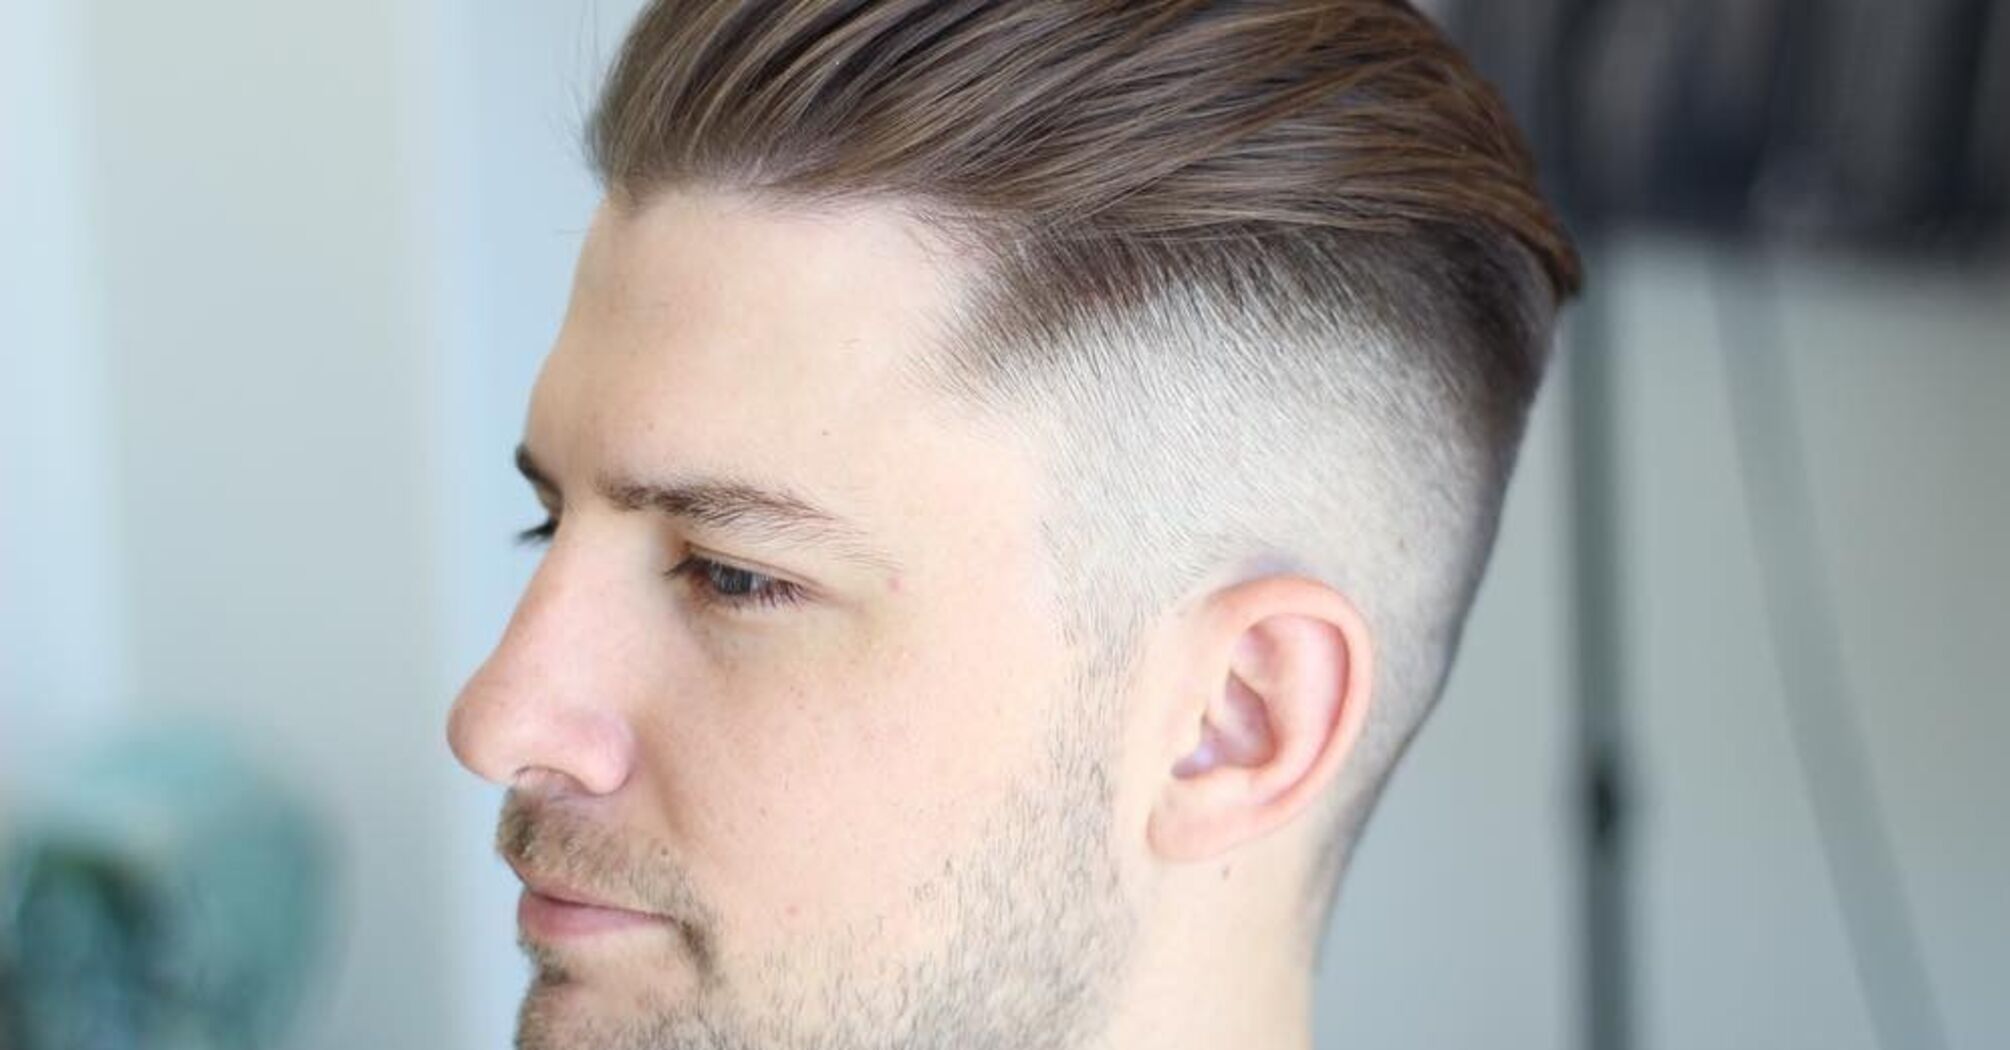 The best men's haircuts for a square face